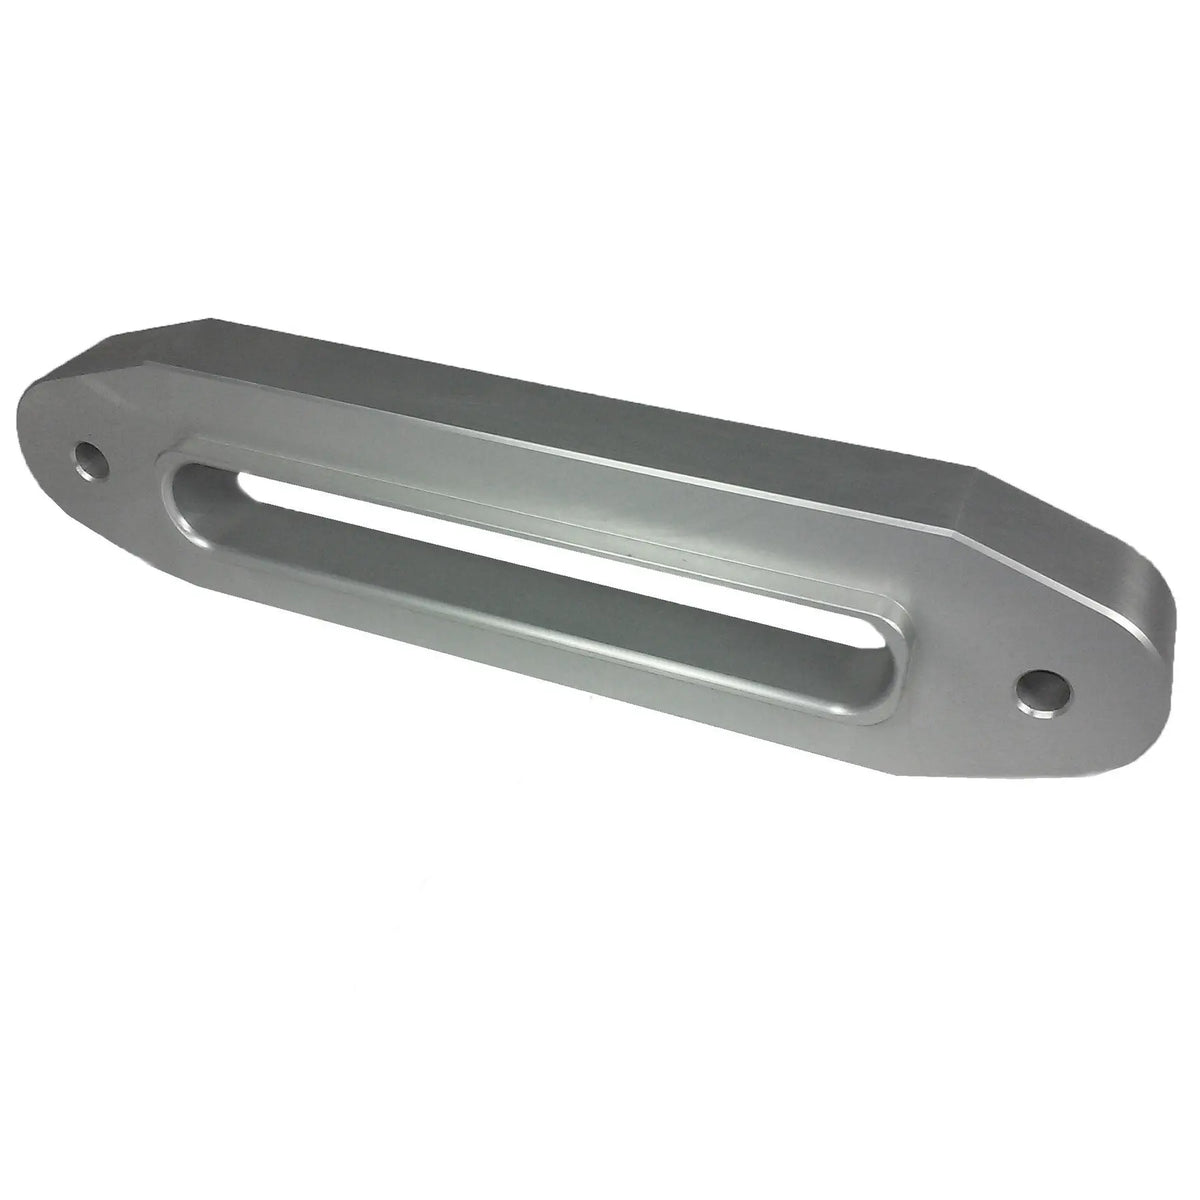 Silver 10" Double Thick  Fairlead with Large Inside Radii and Liner.